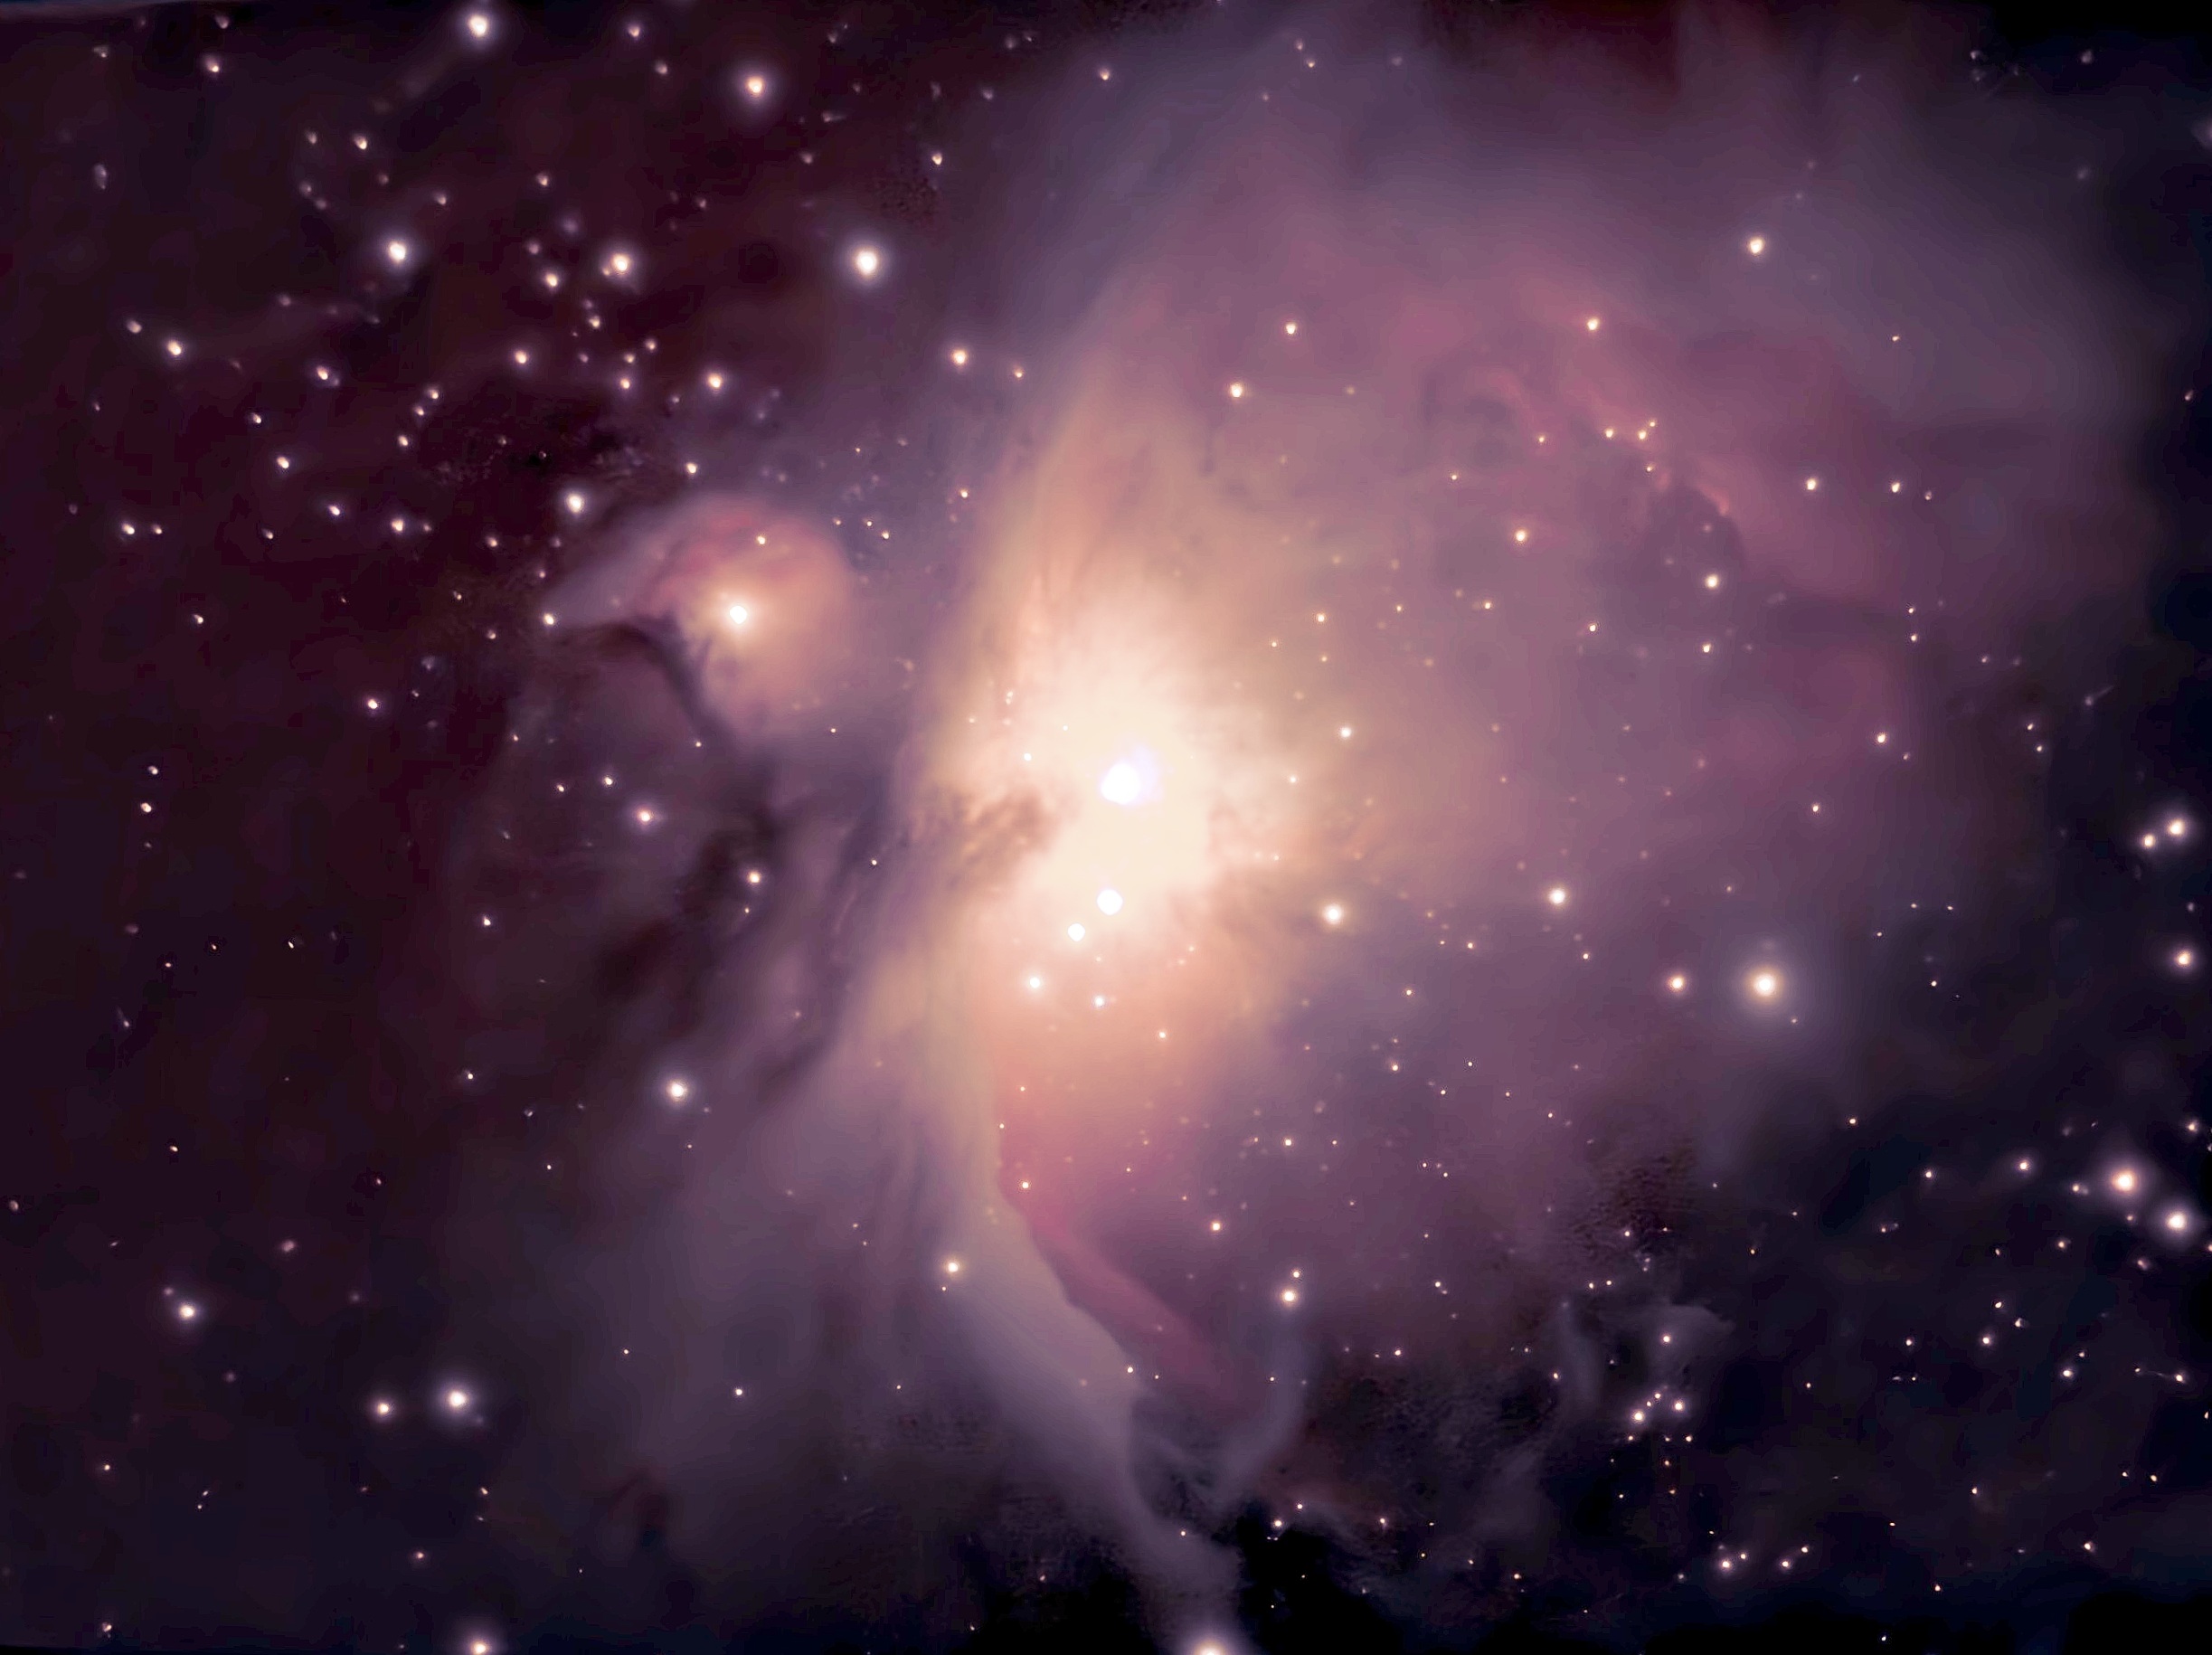 The Great Orion Nebula captured by the Unistellar eQuinox 2.